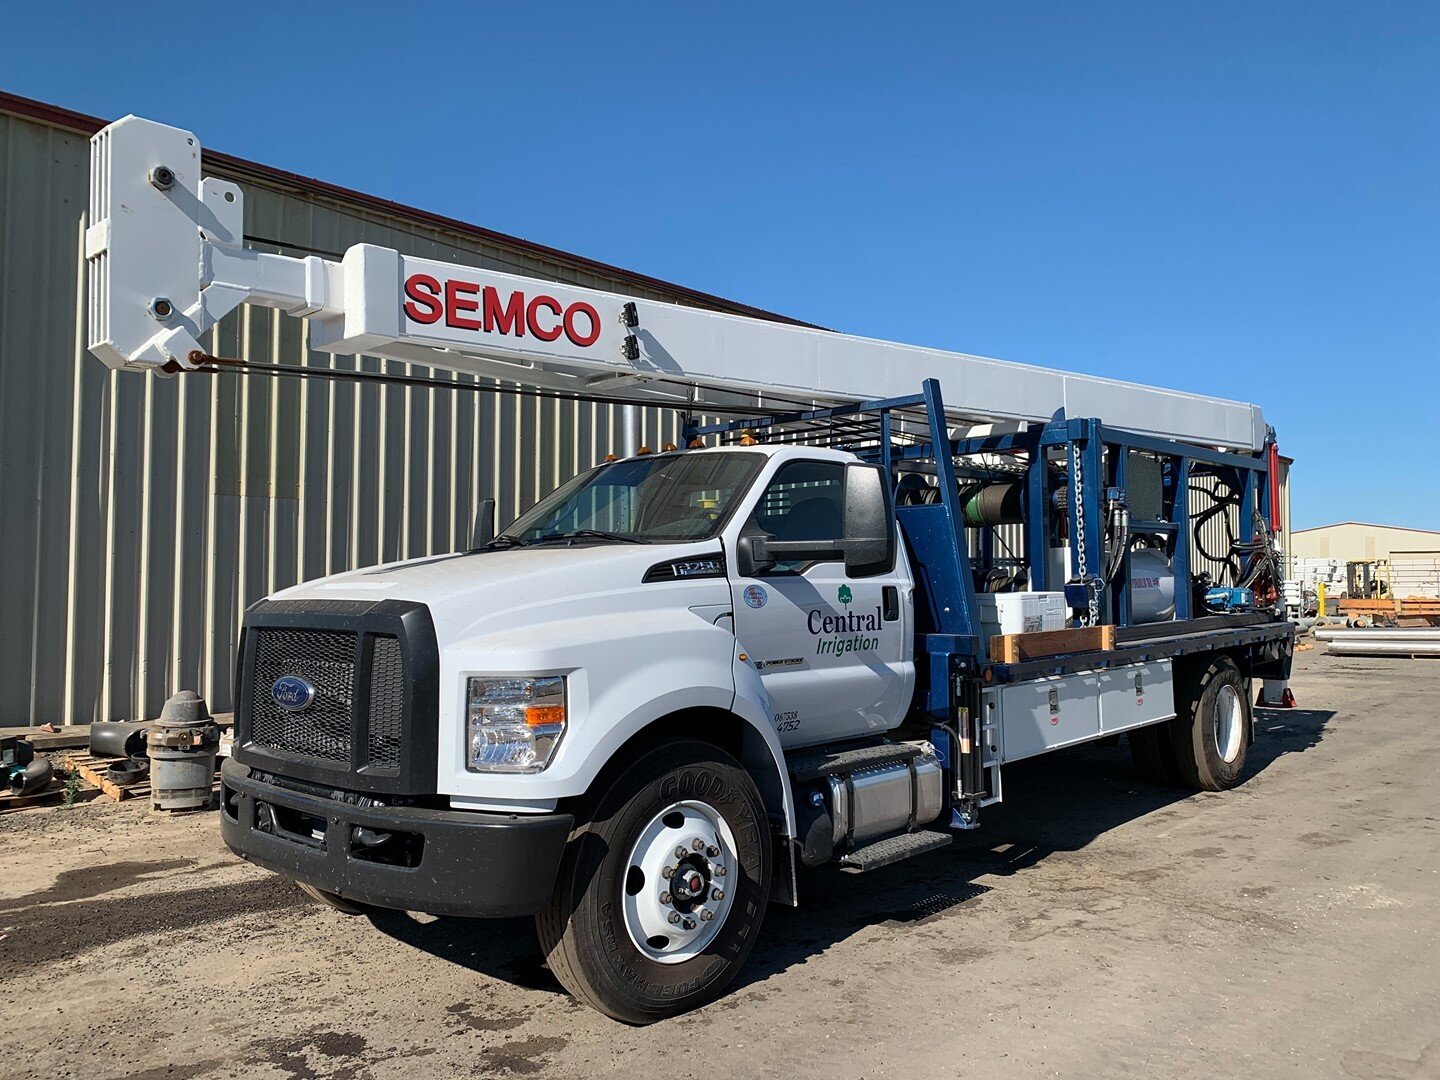 Did you know Central Irrigation employs a fleet of pump trucks capable of handling any of your well pump needs? Everything from your large Ag deep wells to your small domestic wells. Call us the next time you have a problem.

#CentralIrrigation #TheA